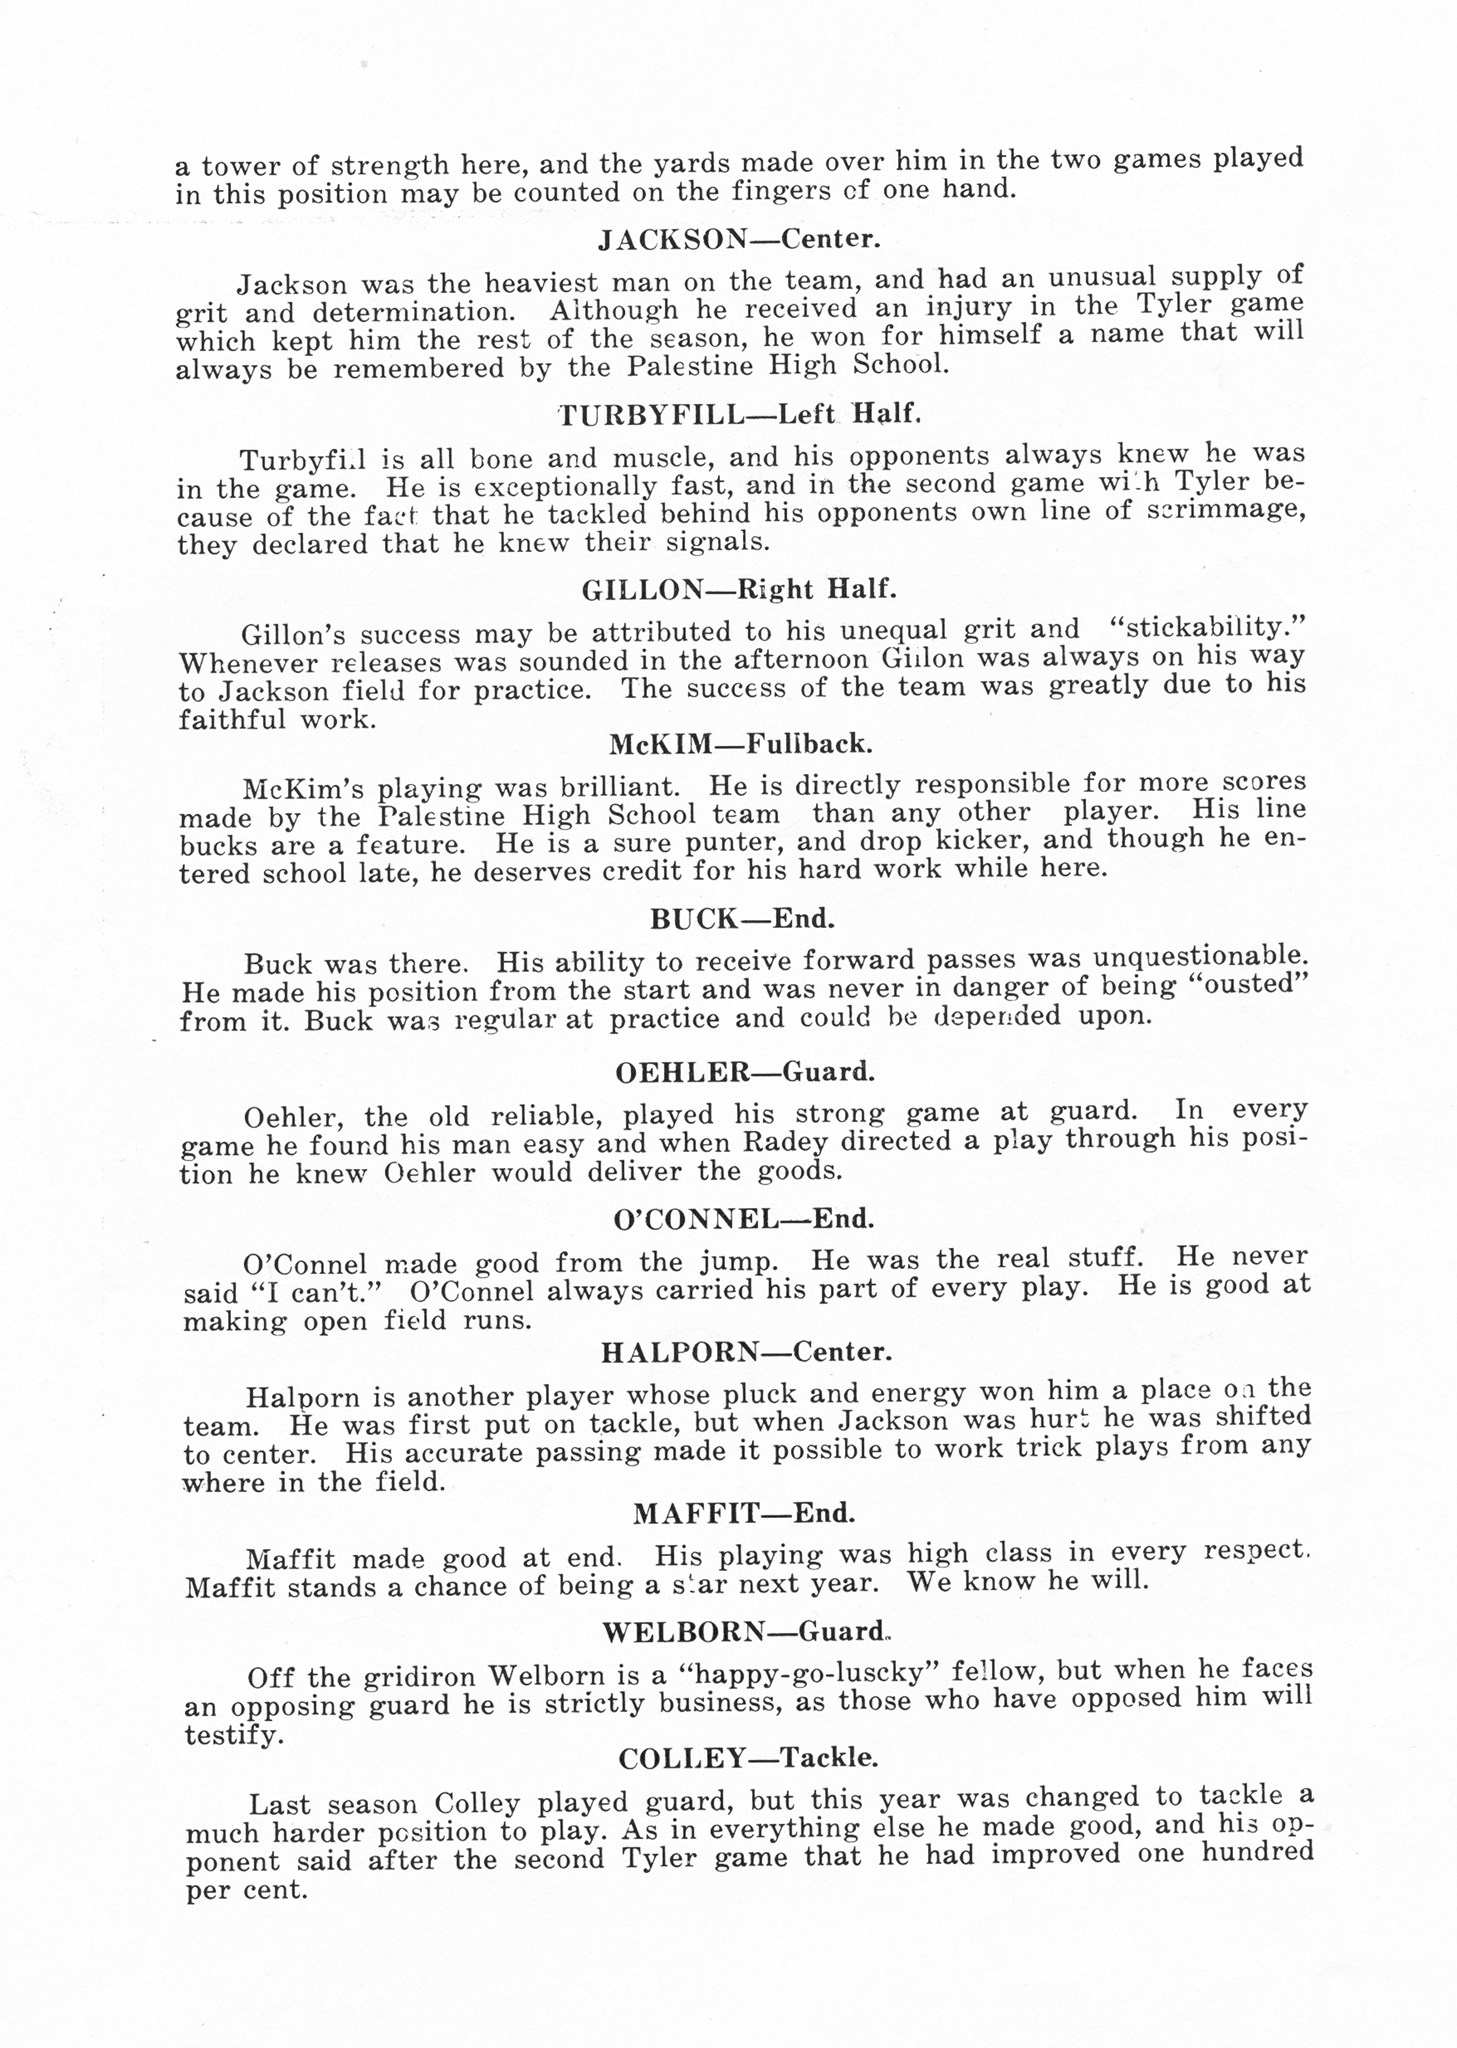 ../../../Images/Large/1912/Arclight-1912-pg0047.jpg